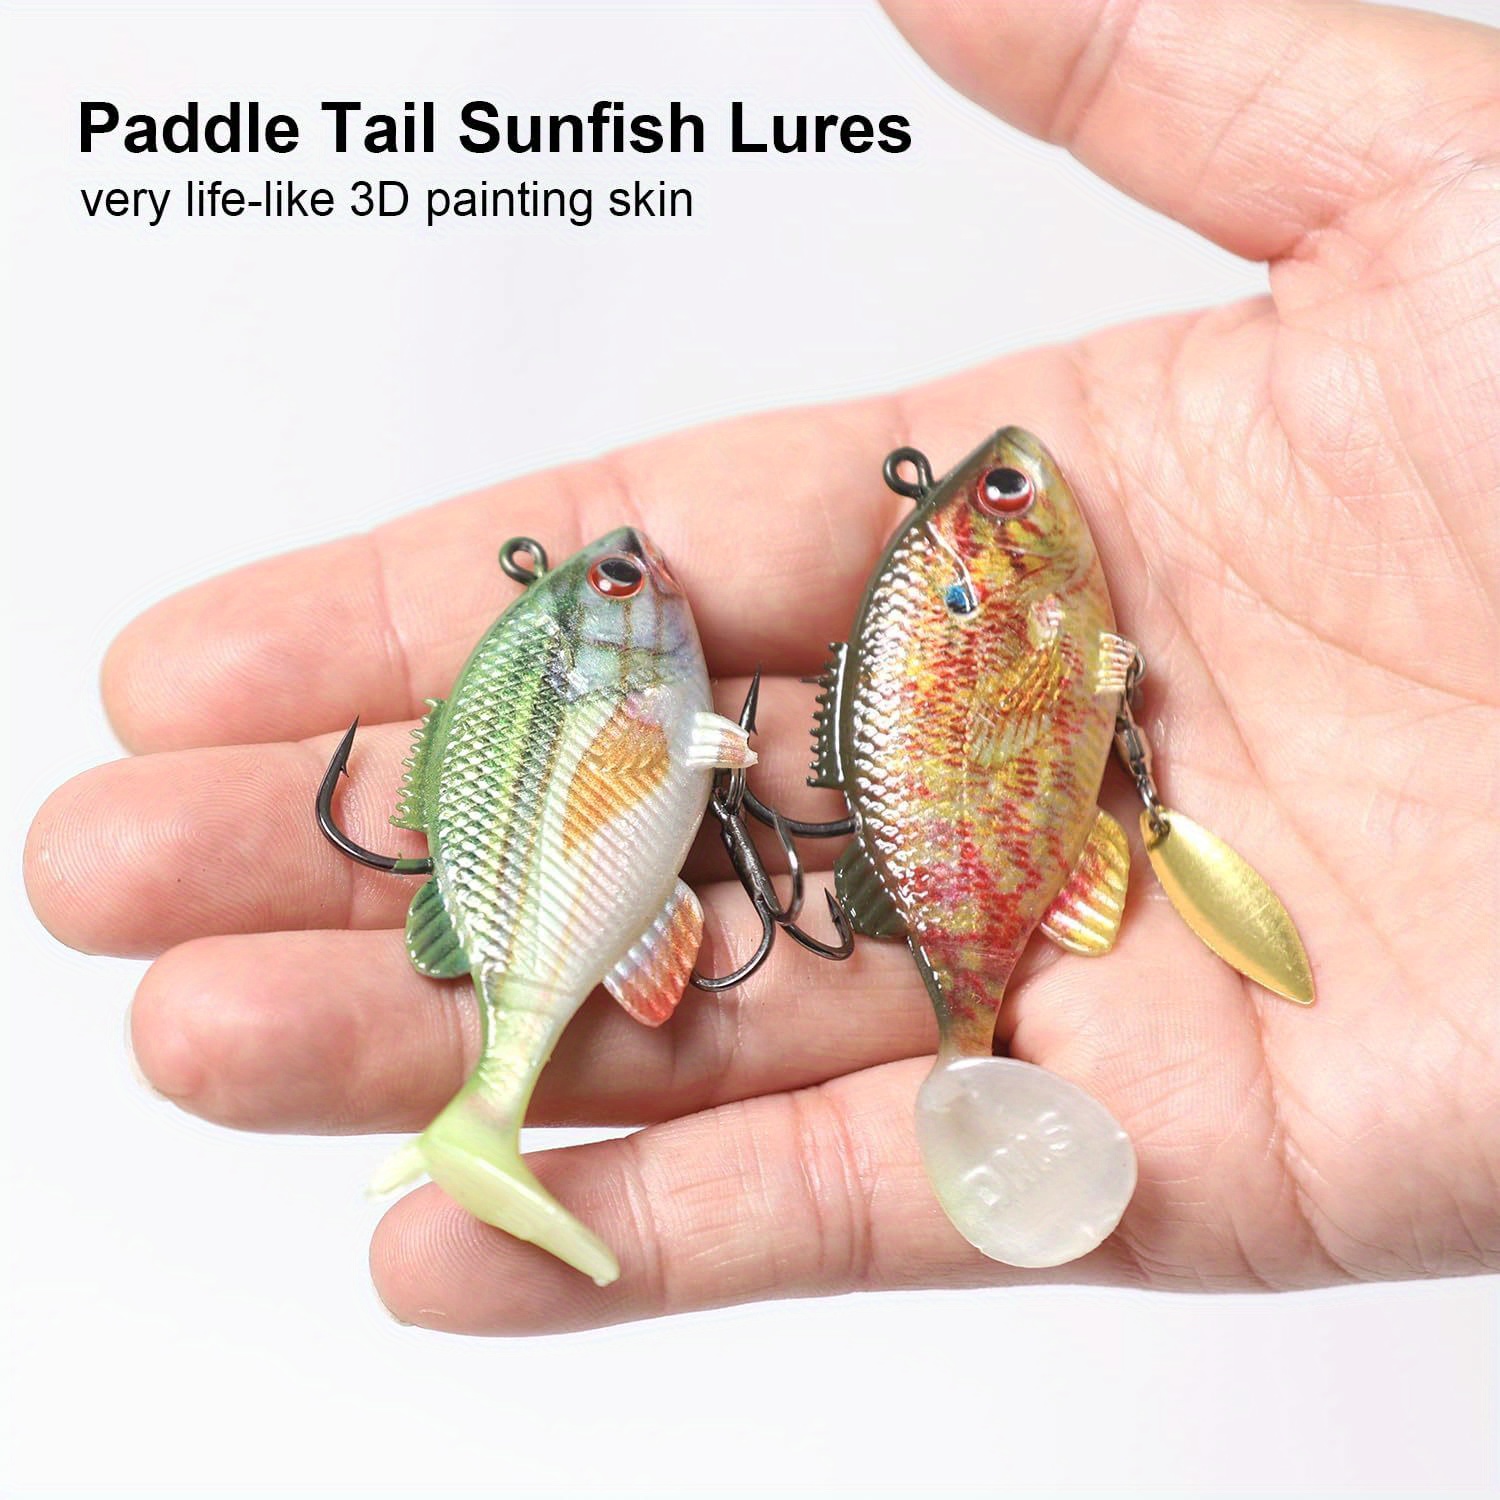 5 Pcs Fishing Baits Plastic Lures Pre-Rigged Jig Head Soft Fishing Lures  Paddle Tail Swimbaits for Saltwater Freshwater - AliExpress